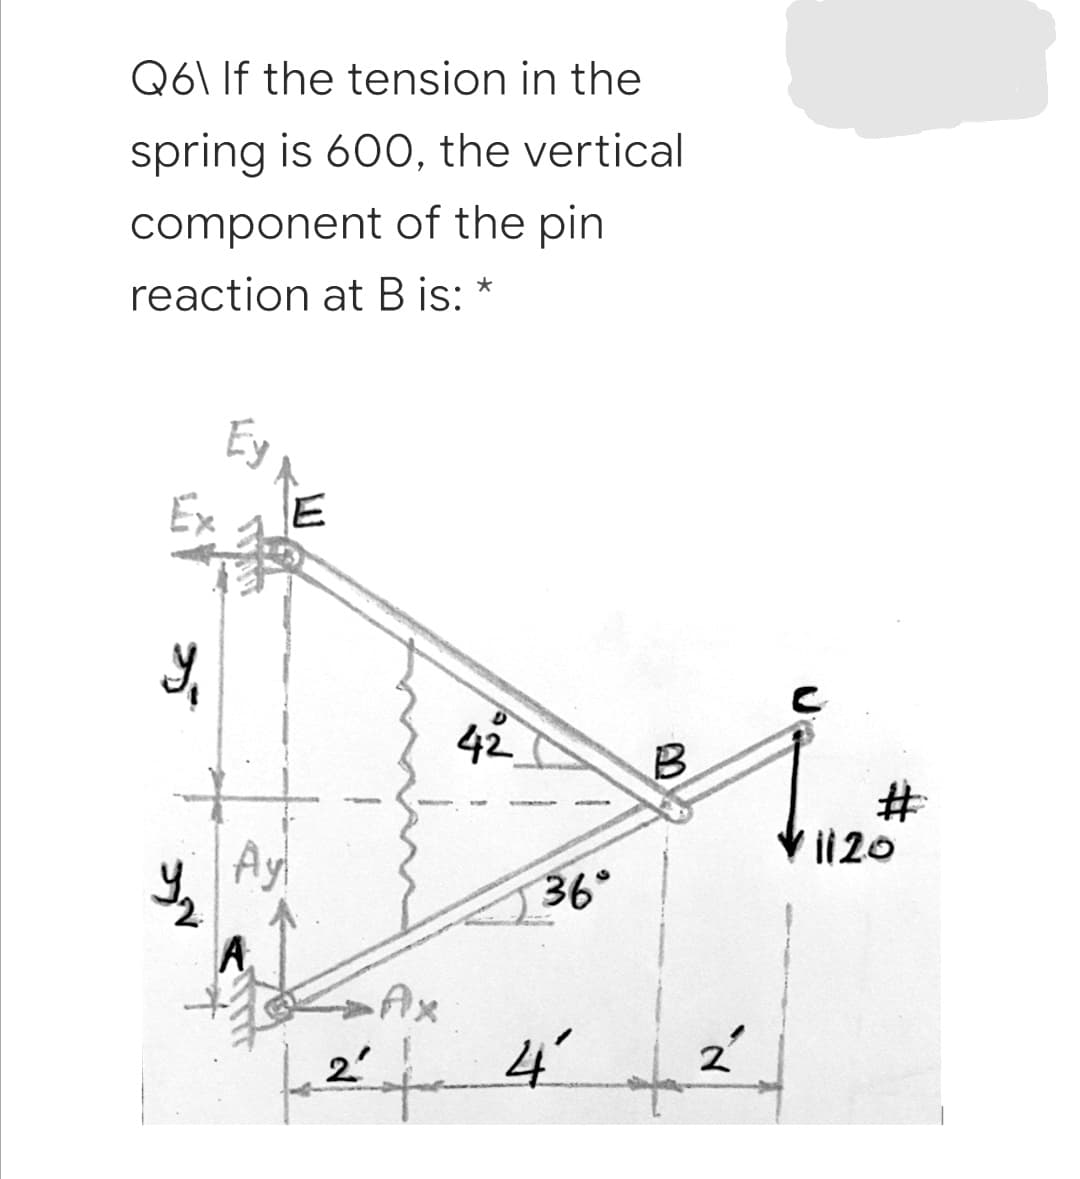 Q6\ If the tension in the
spring is 600, the vertical
component of the pin
reaction at B is:
